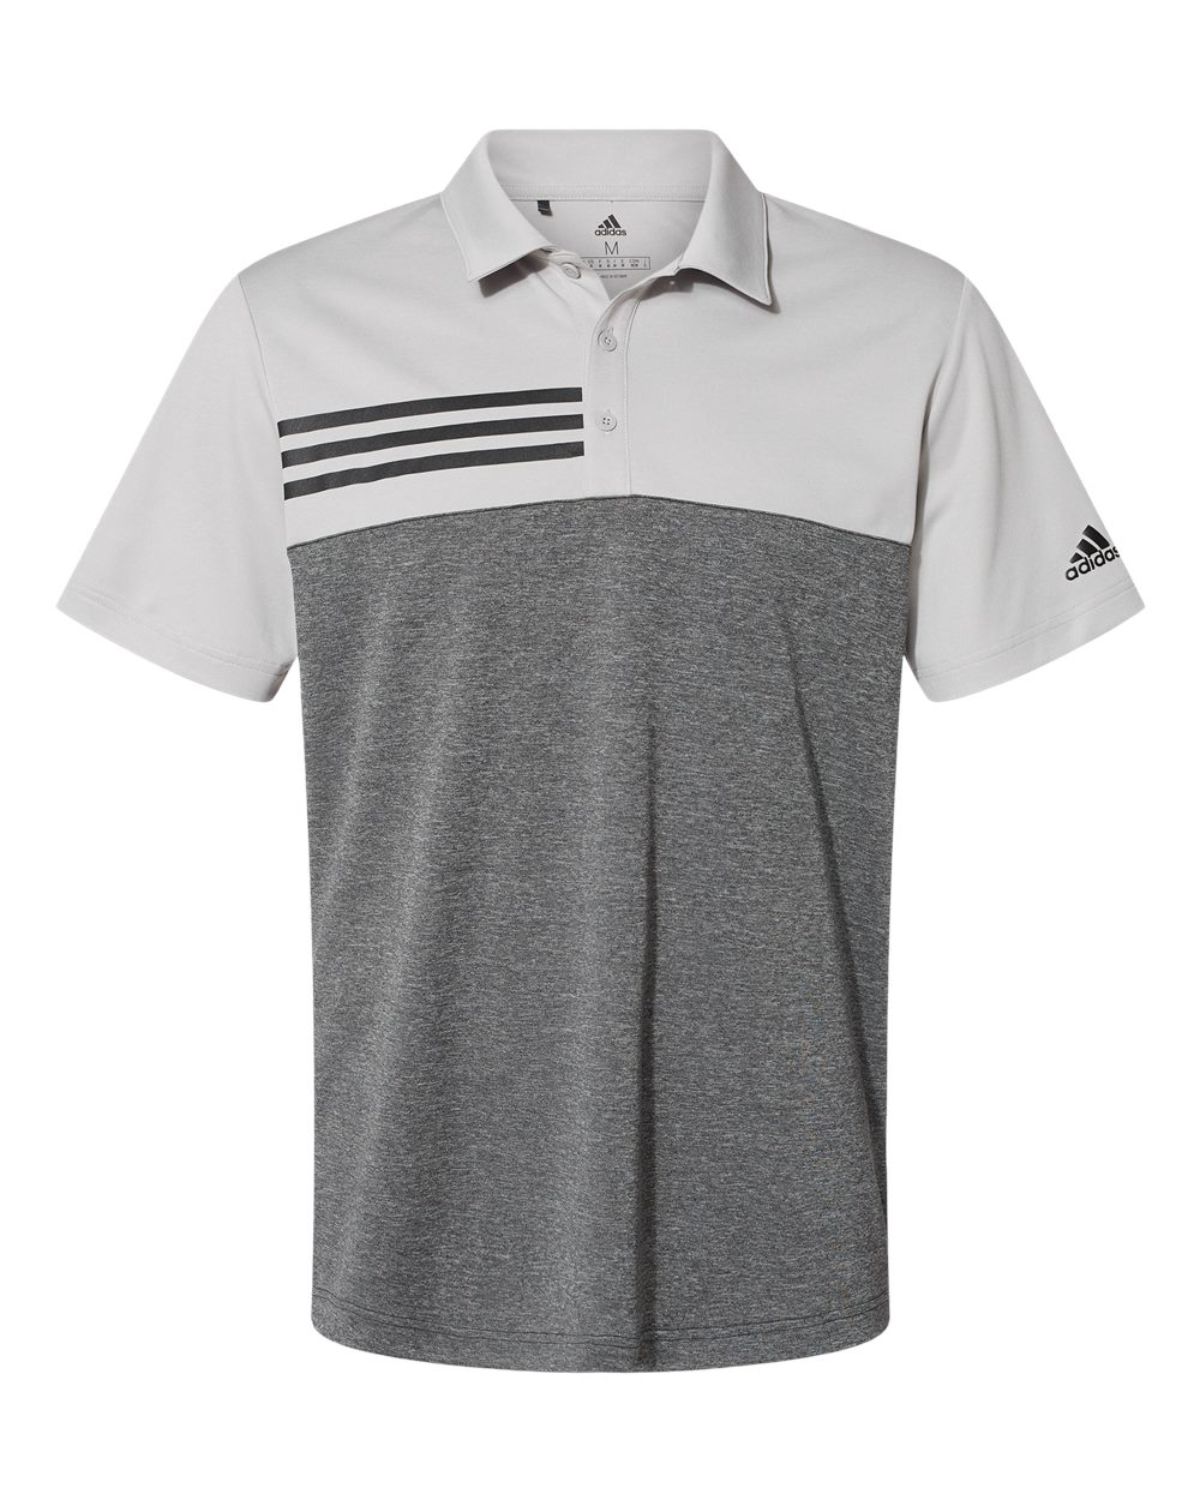 Size Chart for Adidas Golf A508 Heathered Colorblock 3-Stripes Polo ...